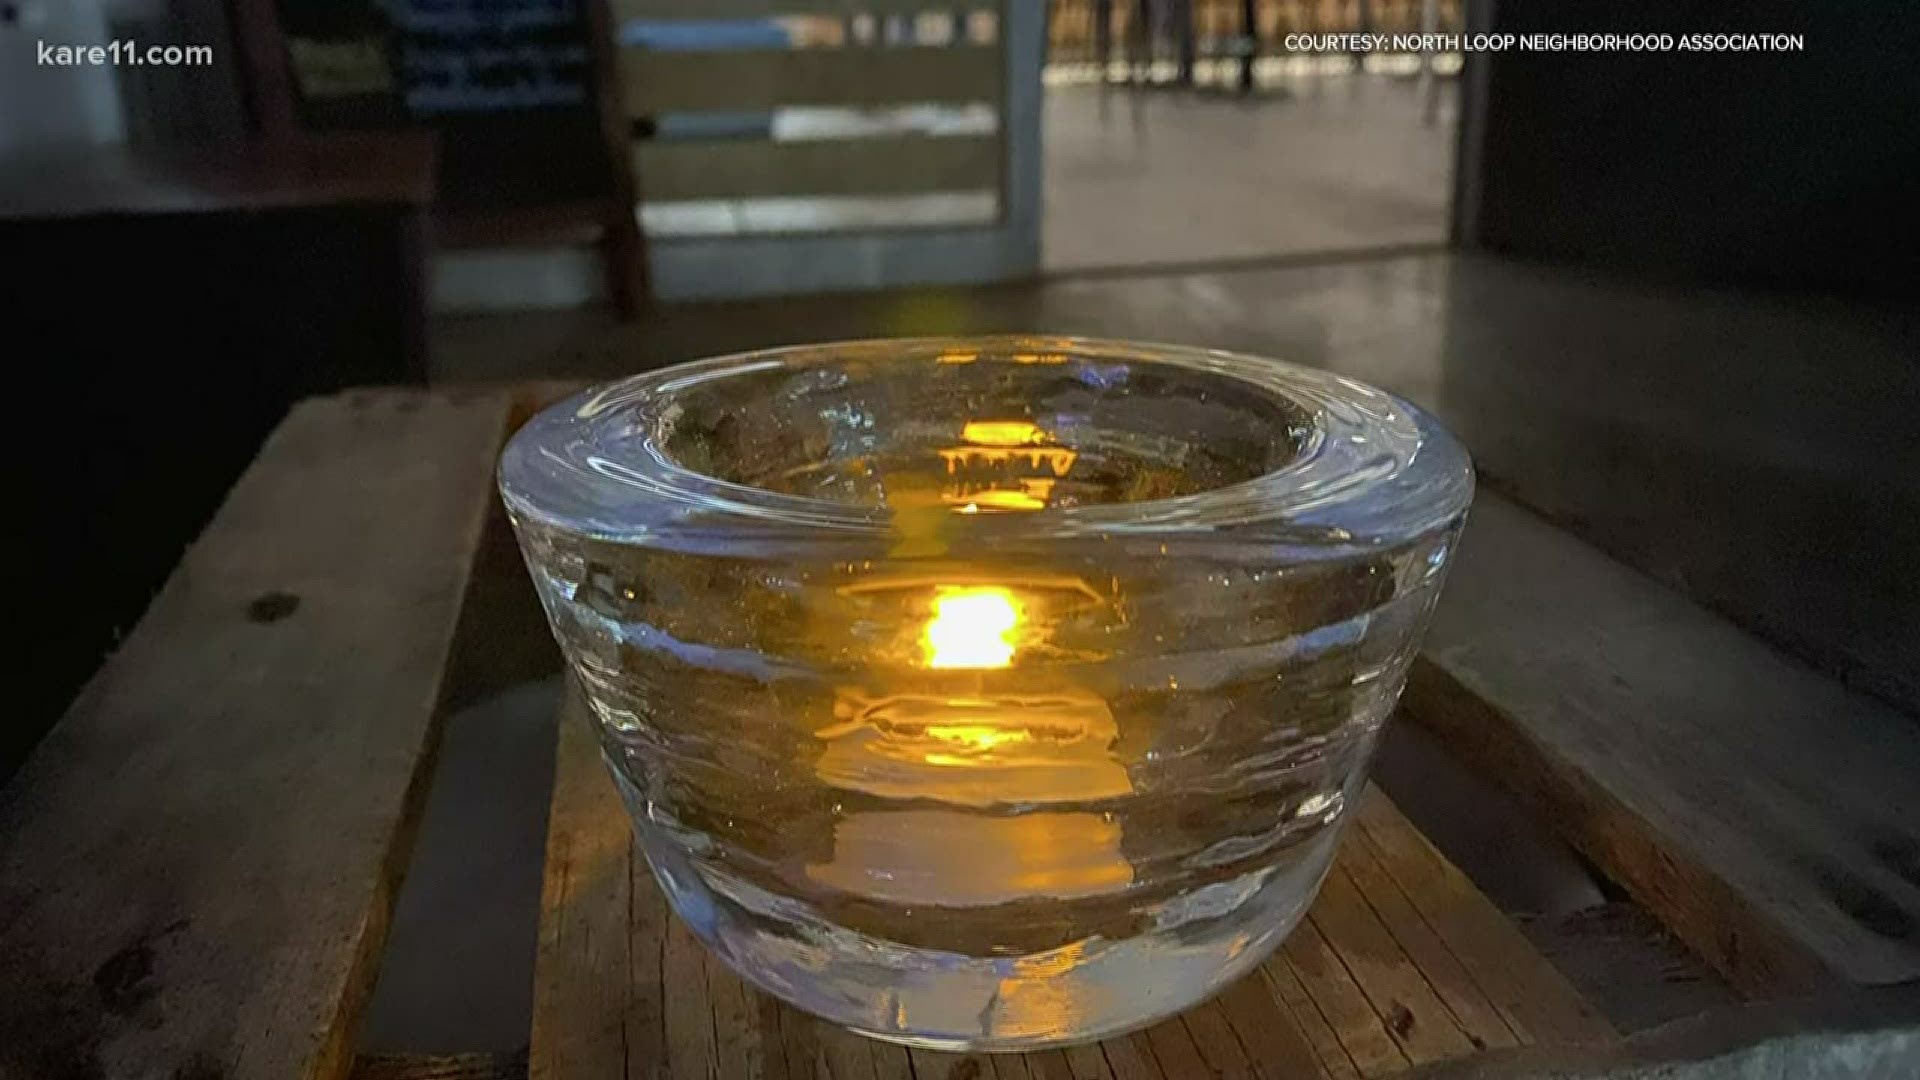 A Minneapolis-based glass manufacturing company has created a symbol of hope to shine light on businesses in the North Loop during the coronavirus pandemic.